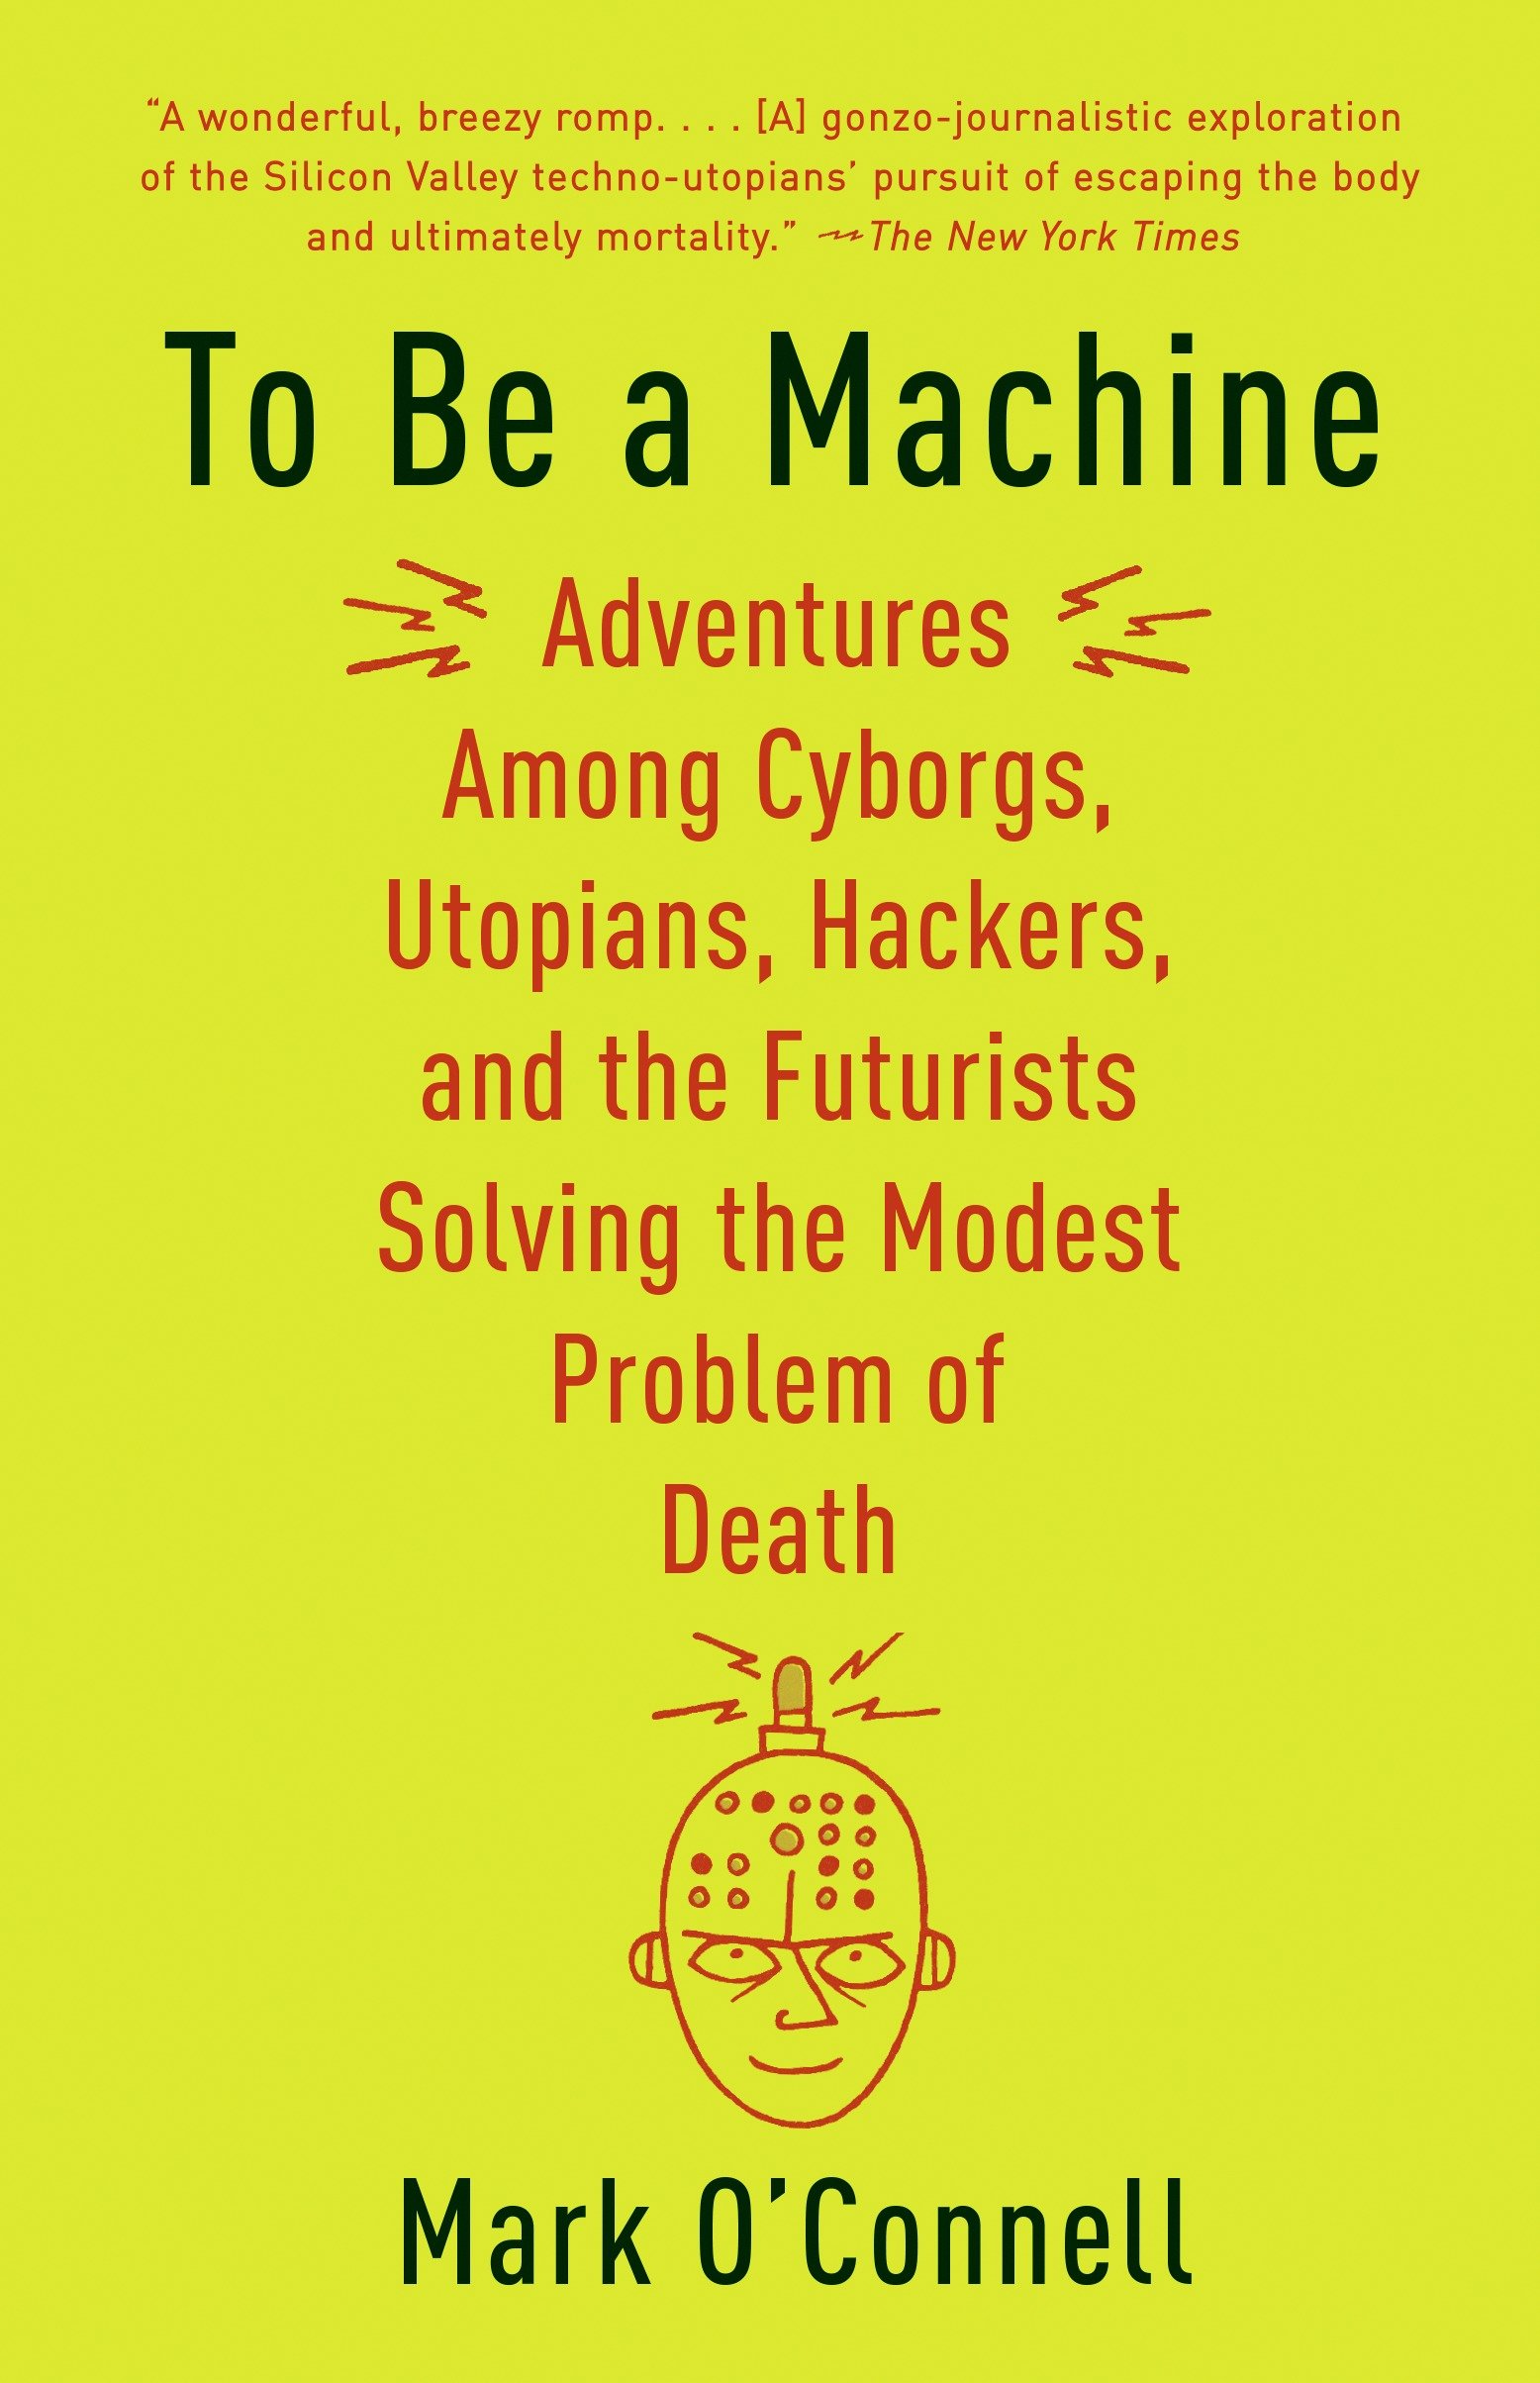 Umschlagbild für To Be a Machine [electronic resource] : Adventures Among Cyborgs, Utopians, Hackers, and the Futurists Solving the Modest Problem of Death